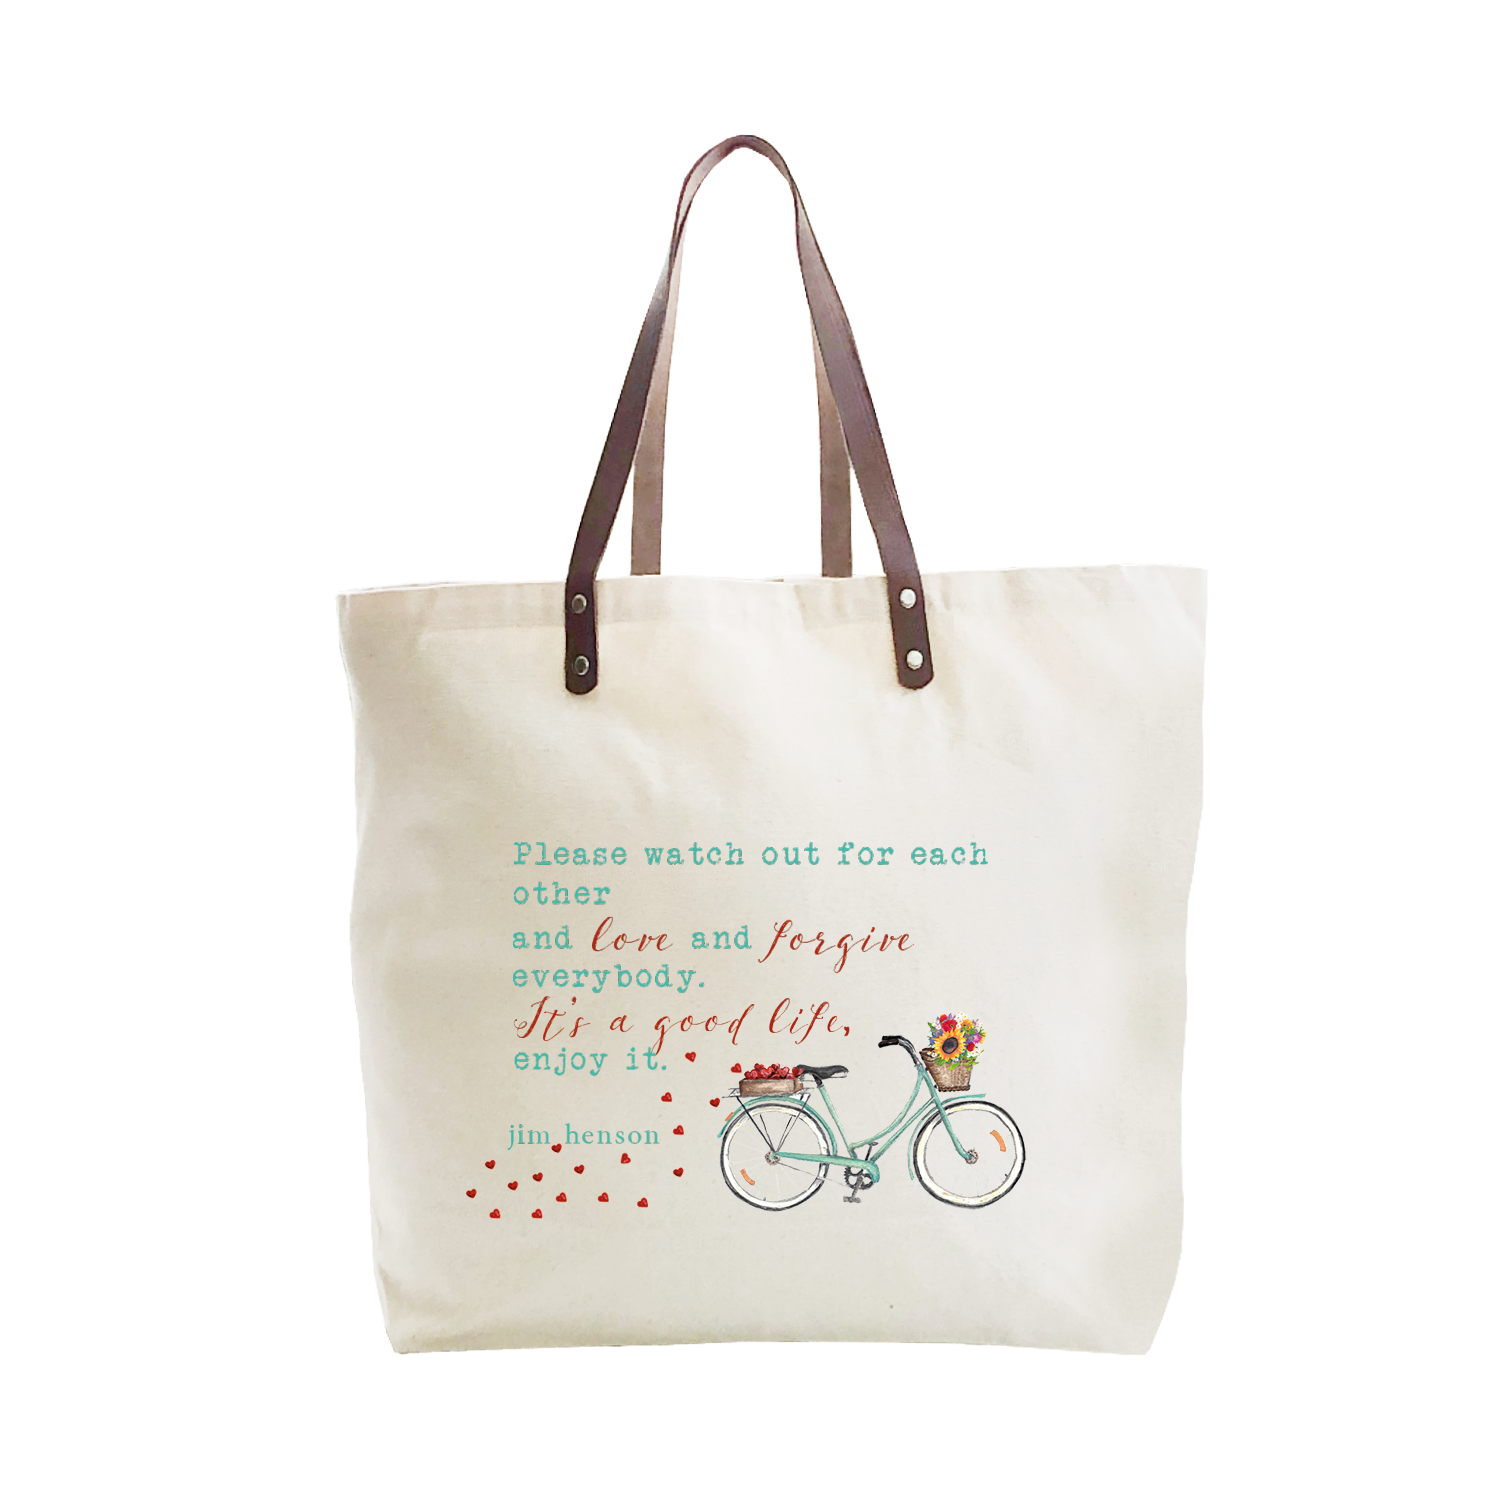 wildflower bike with jim henson quote large tote